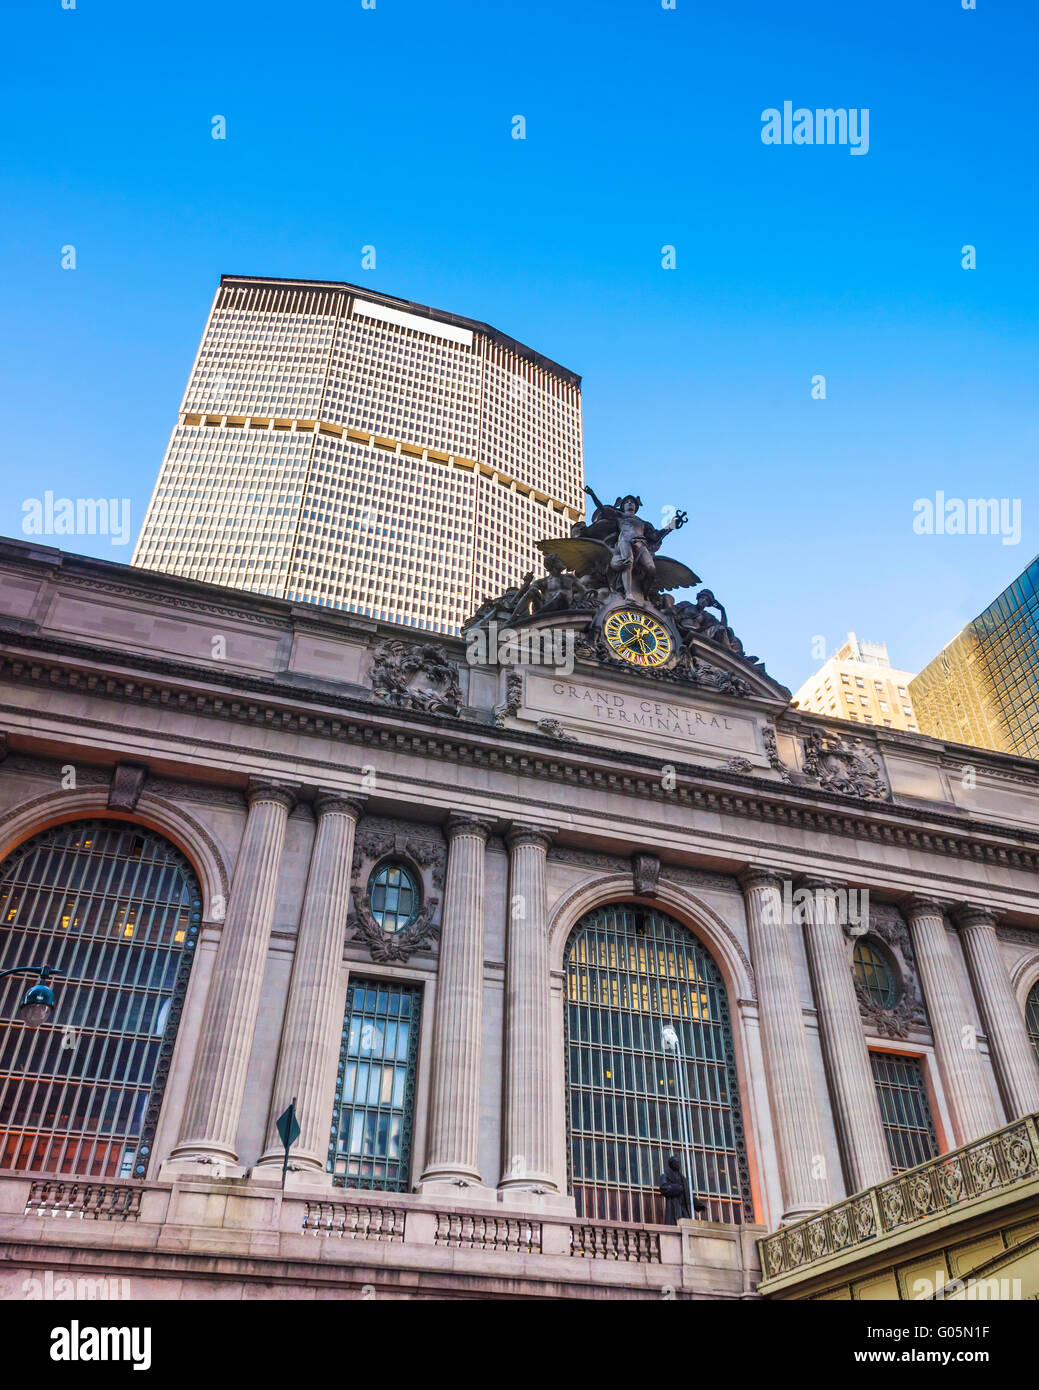 New York, USA - April 24, 2015: Fragment of Grand Central Terminal Building in Midtown Manhattan, New York City, USA. It is GCT Stock Photo